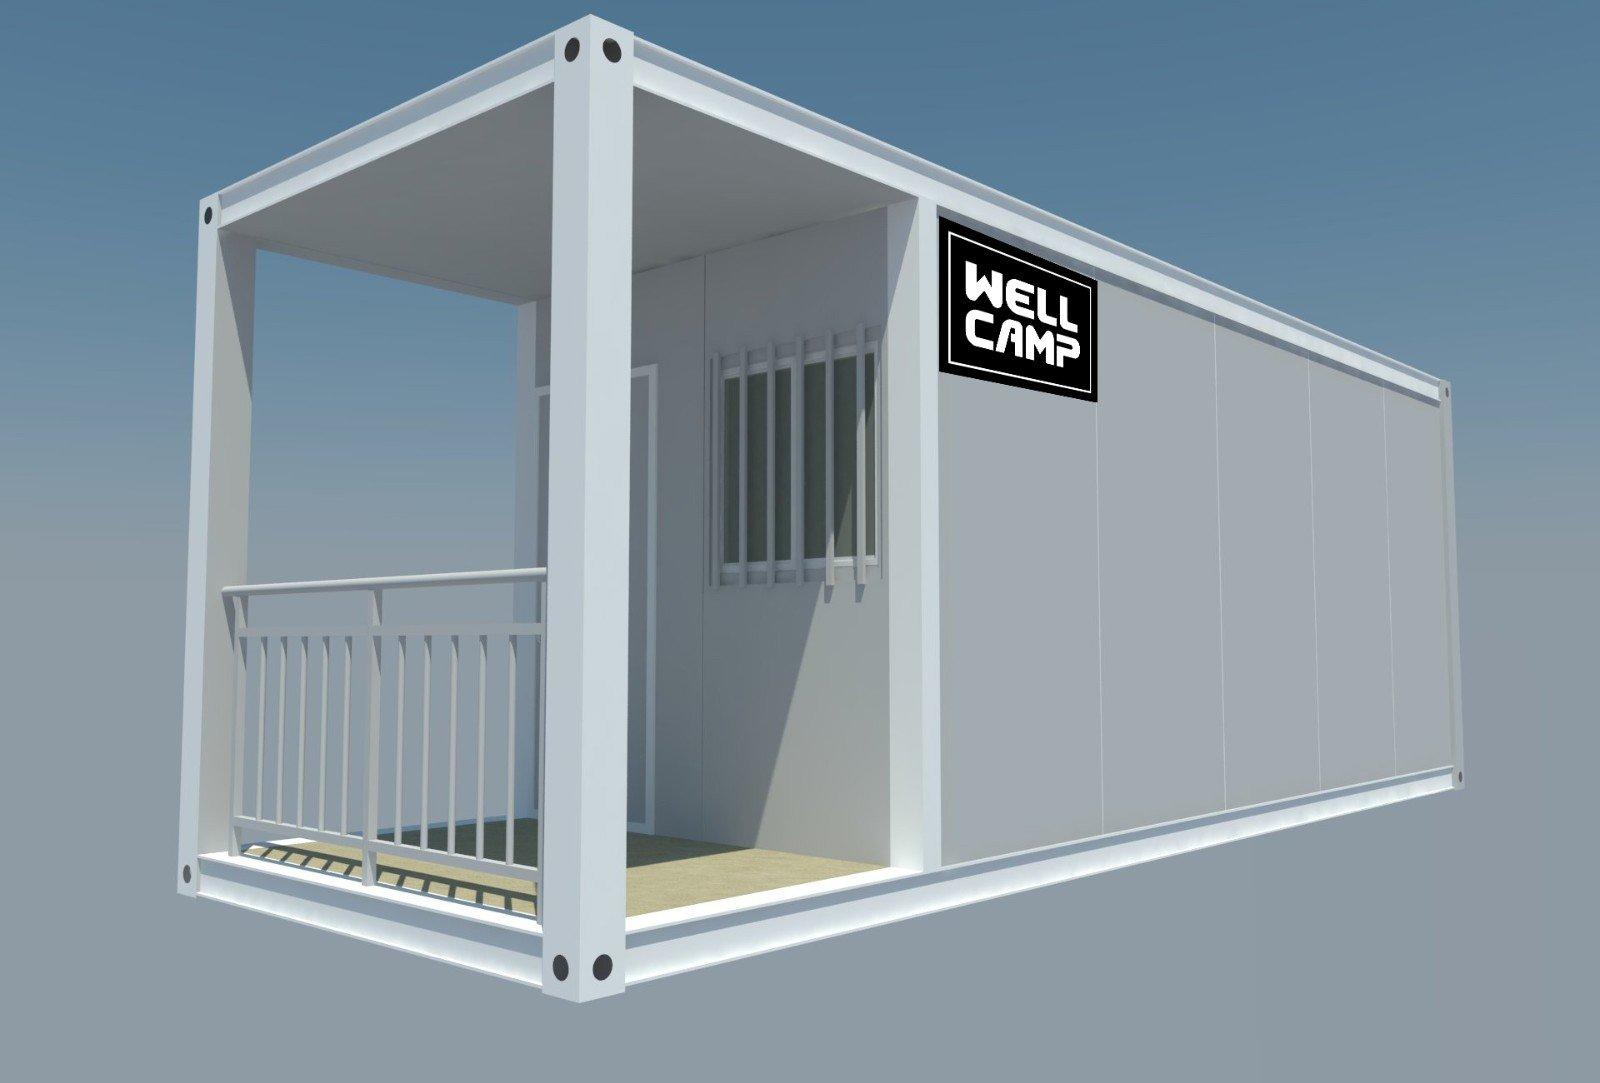 Custom galss fireproof flat pack containers WELLCAMP installation